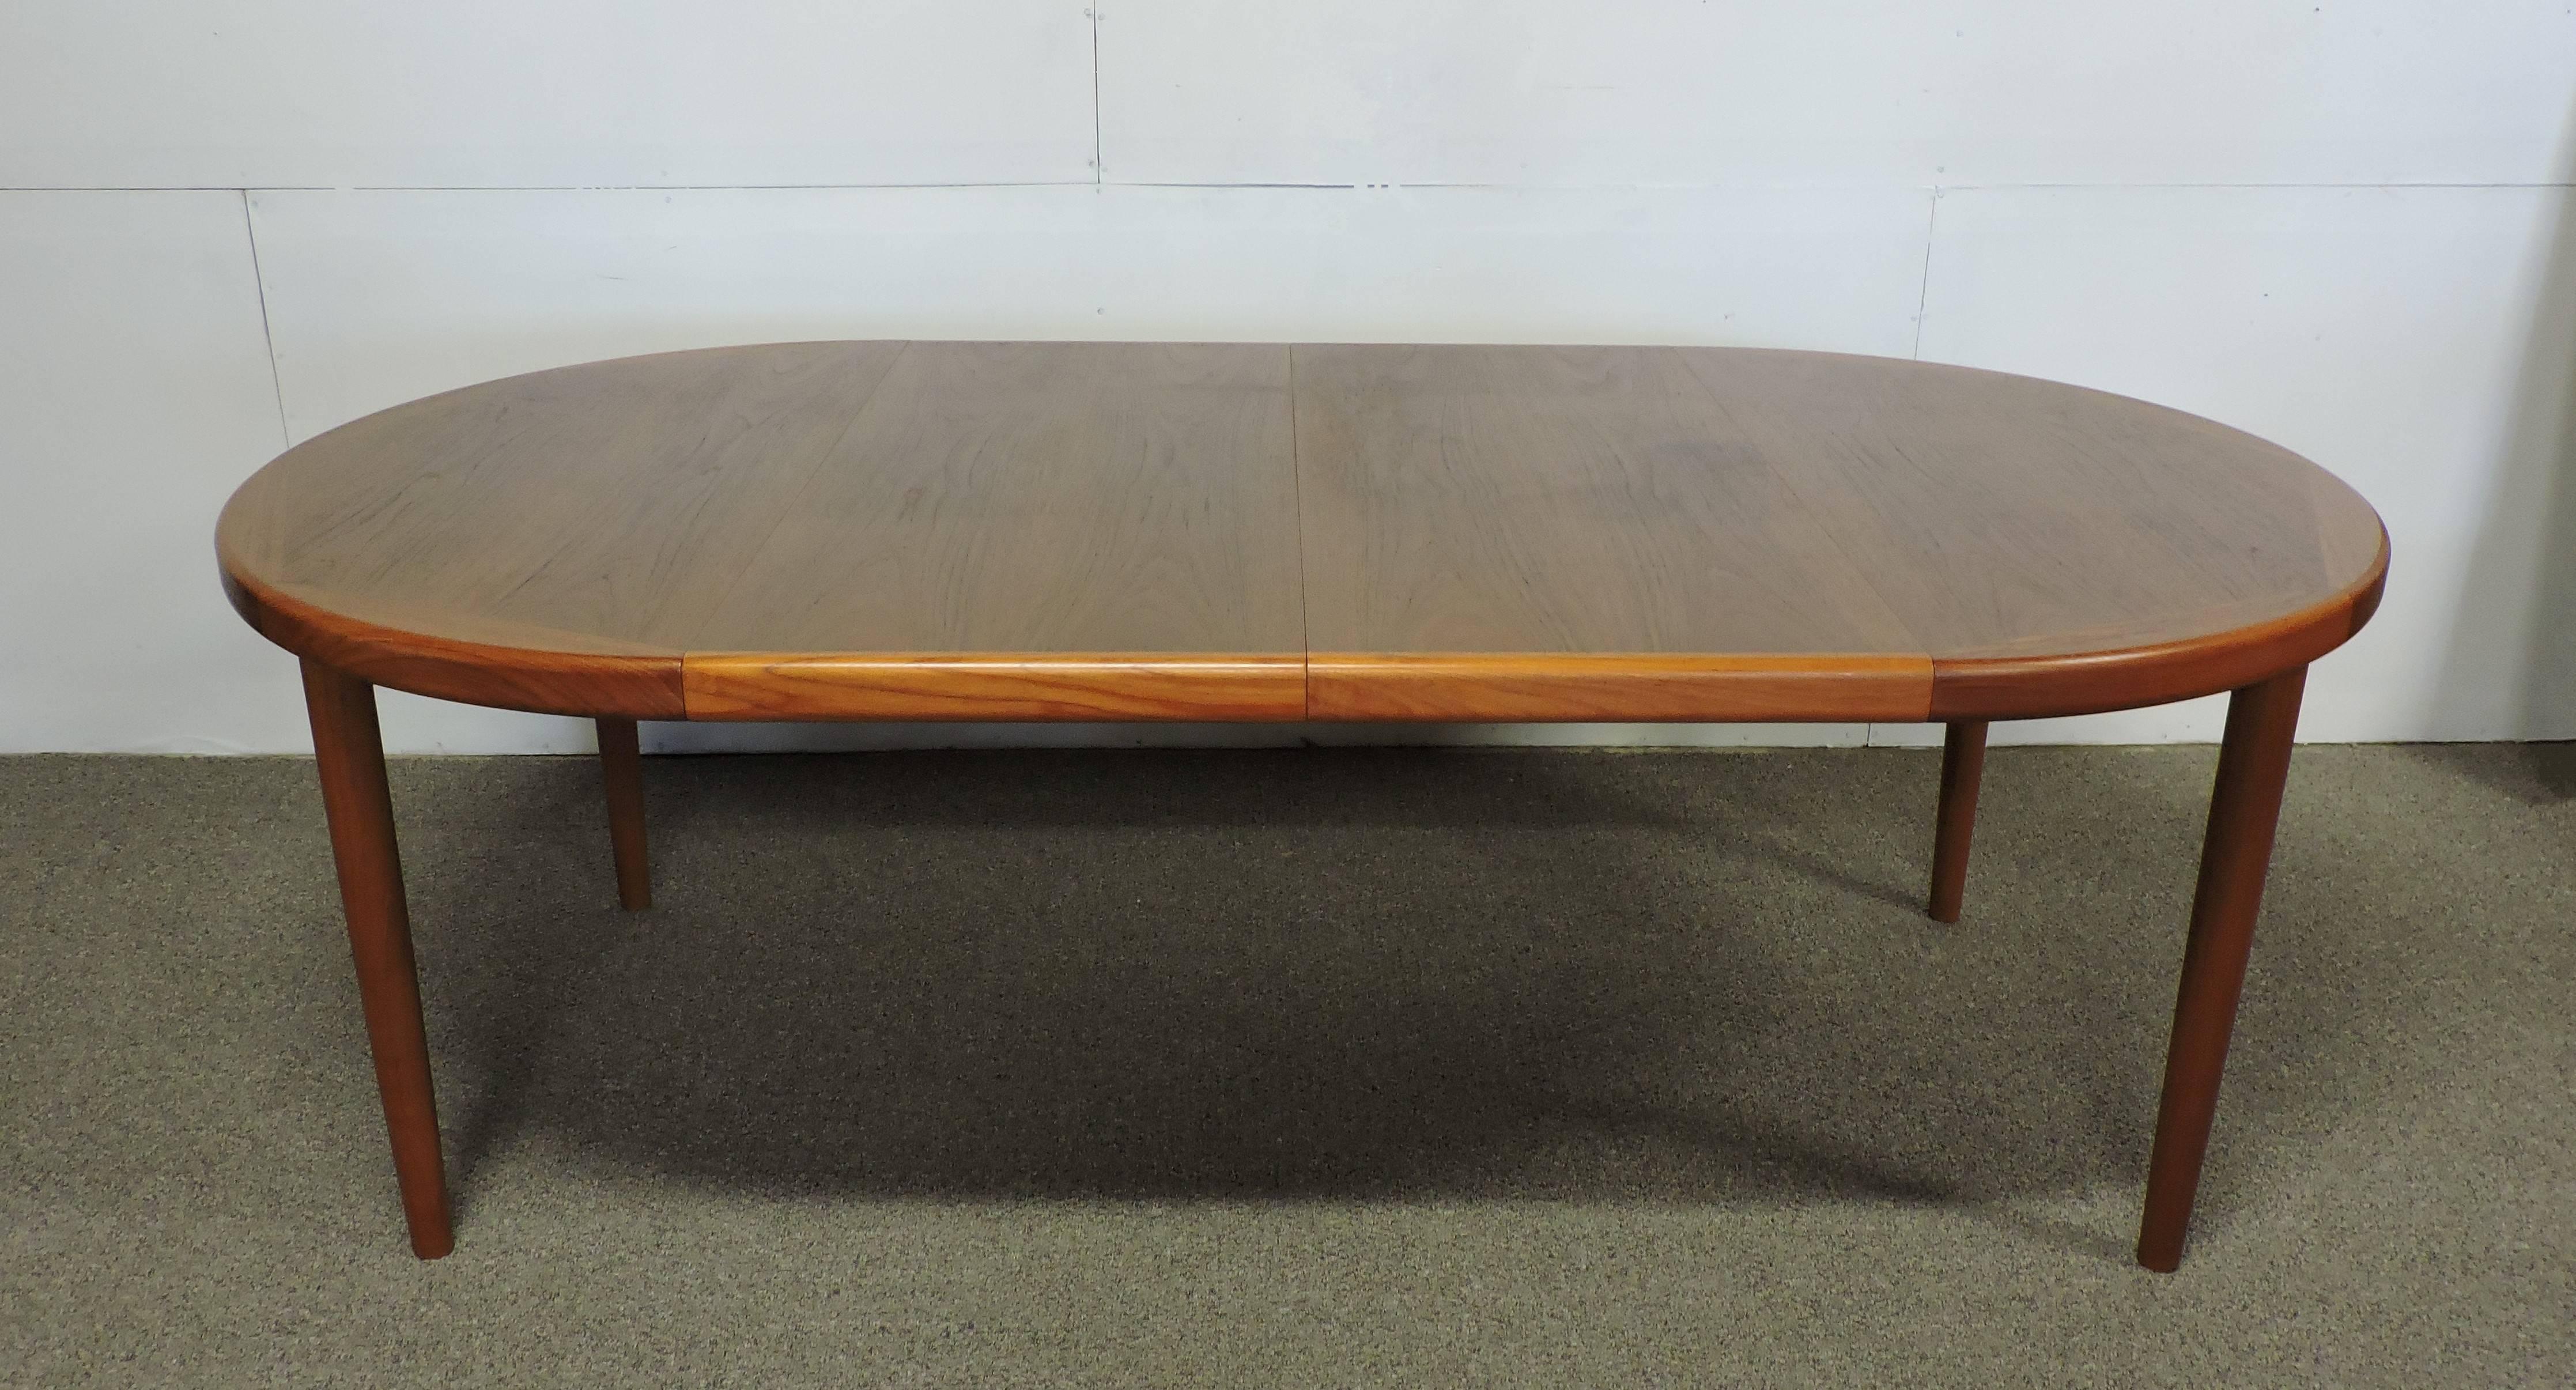 Scandinavian Modern Danish Modern Teak Extendable Dining Table by Vejle Stole with Two Leaves